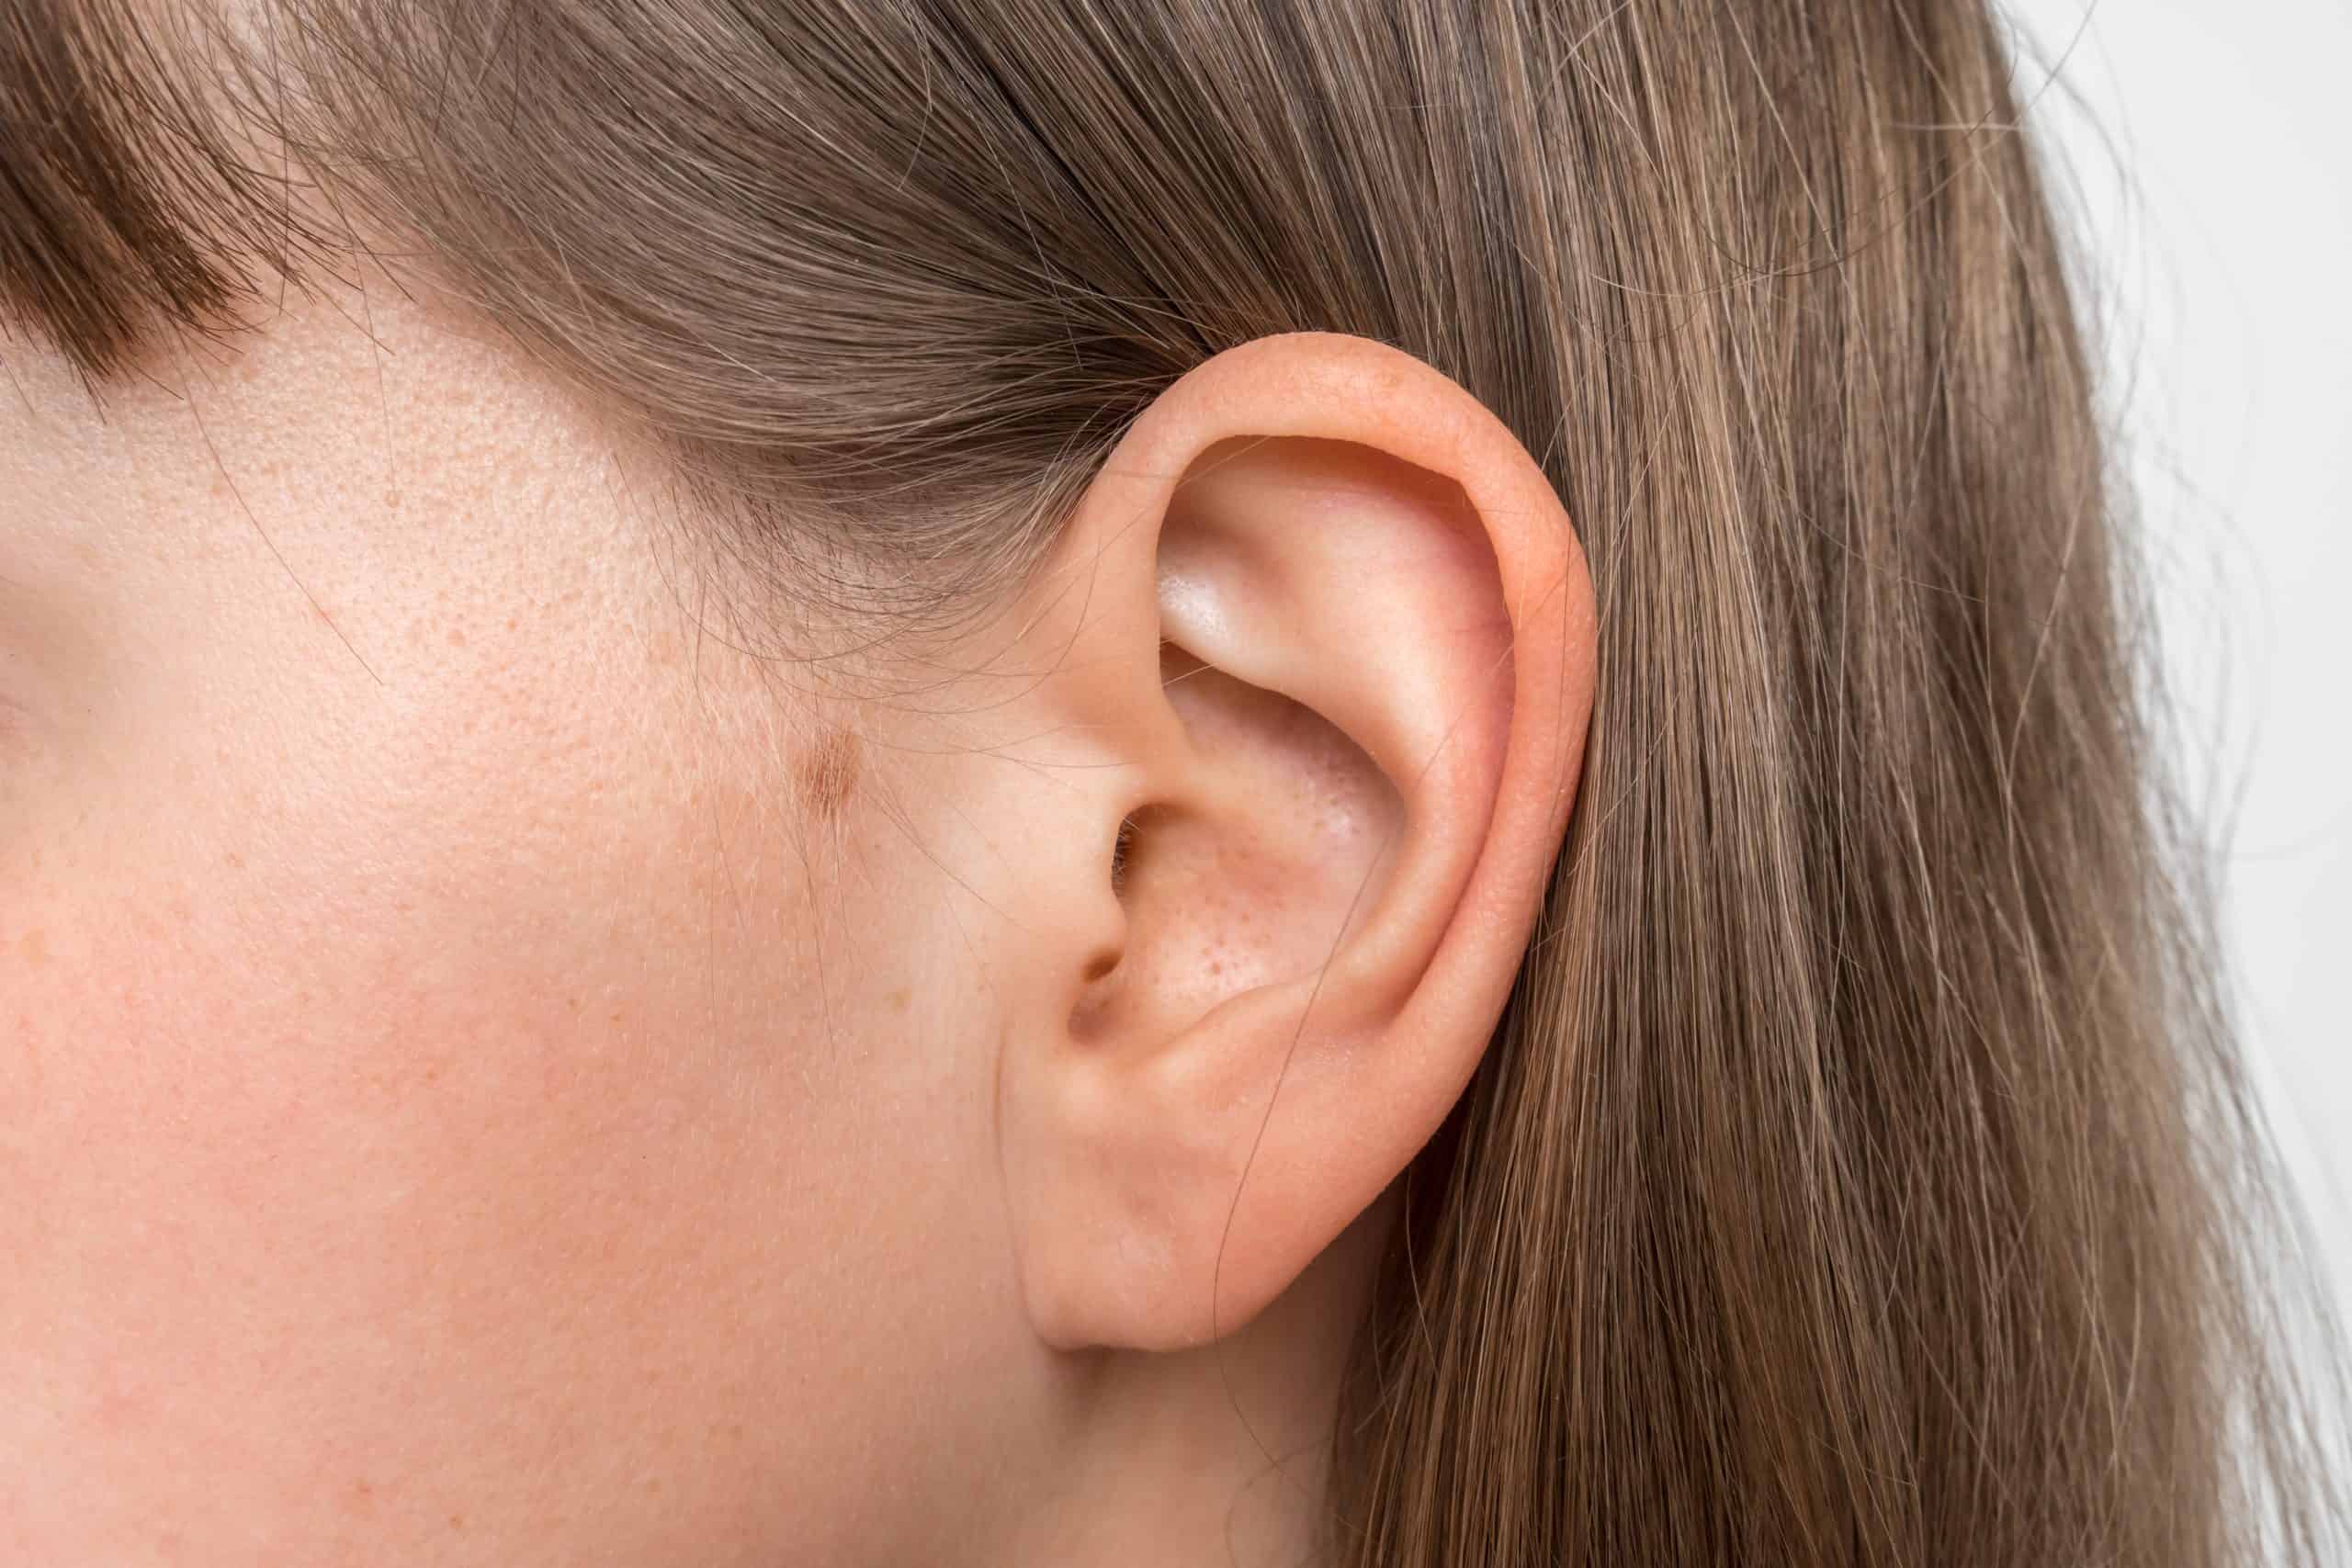 Close up of human head with female ear - listening or deafness concept